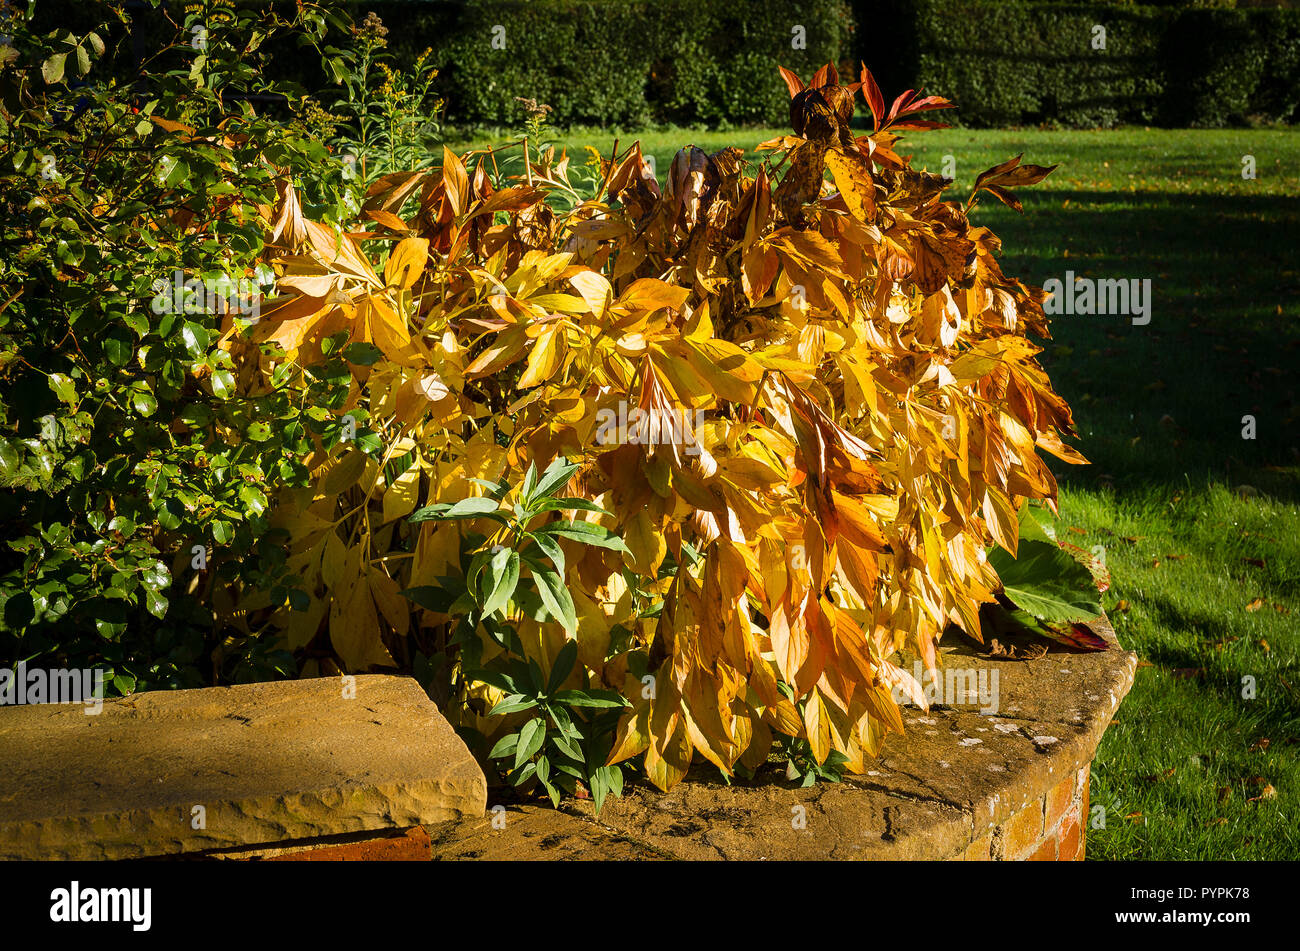 A peony plant in October showing the lovely golden colour of the dying foliiage in an English garden Stock Photo